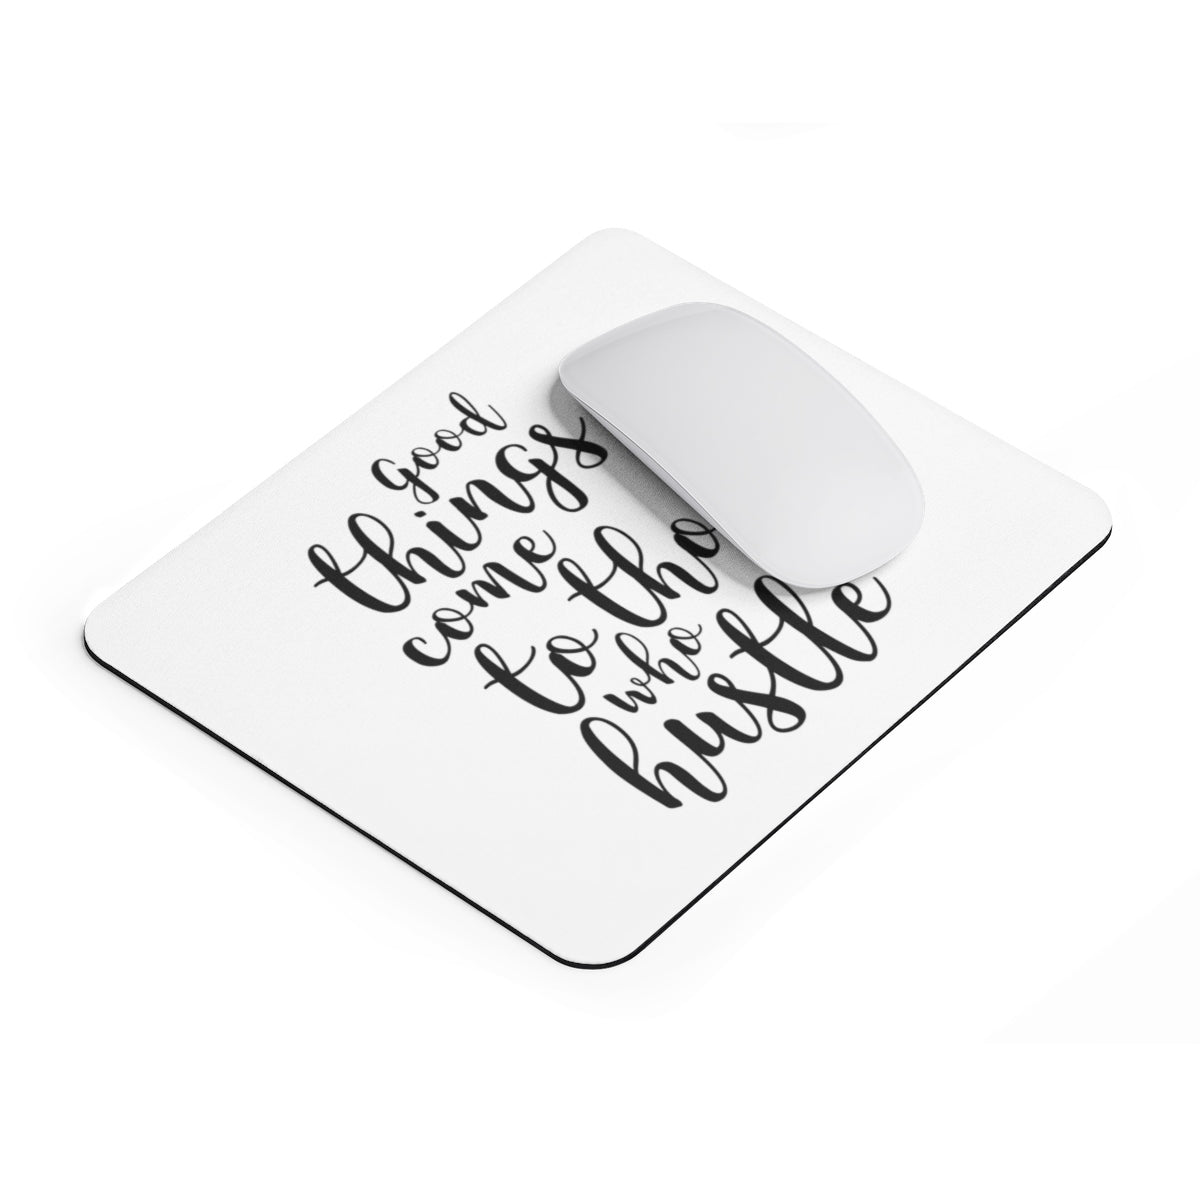 Good Things Come To Those Who Hustle Mousepad - Inspired By Savy